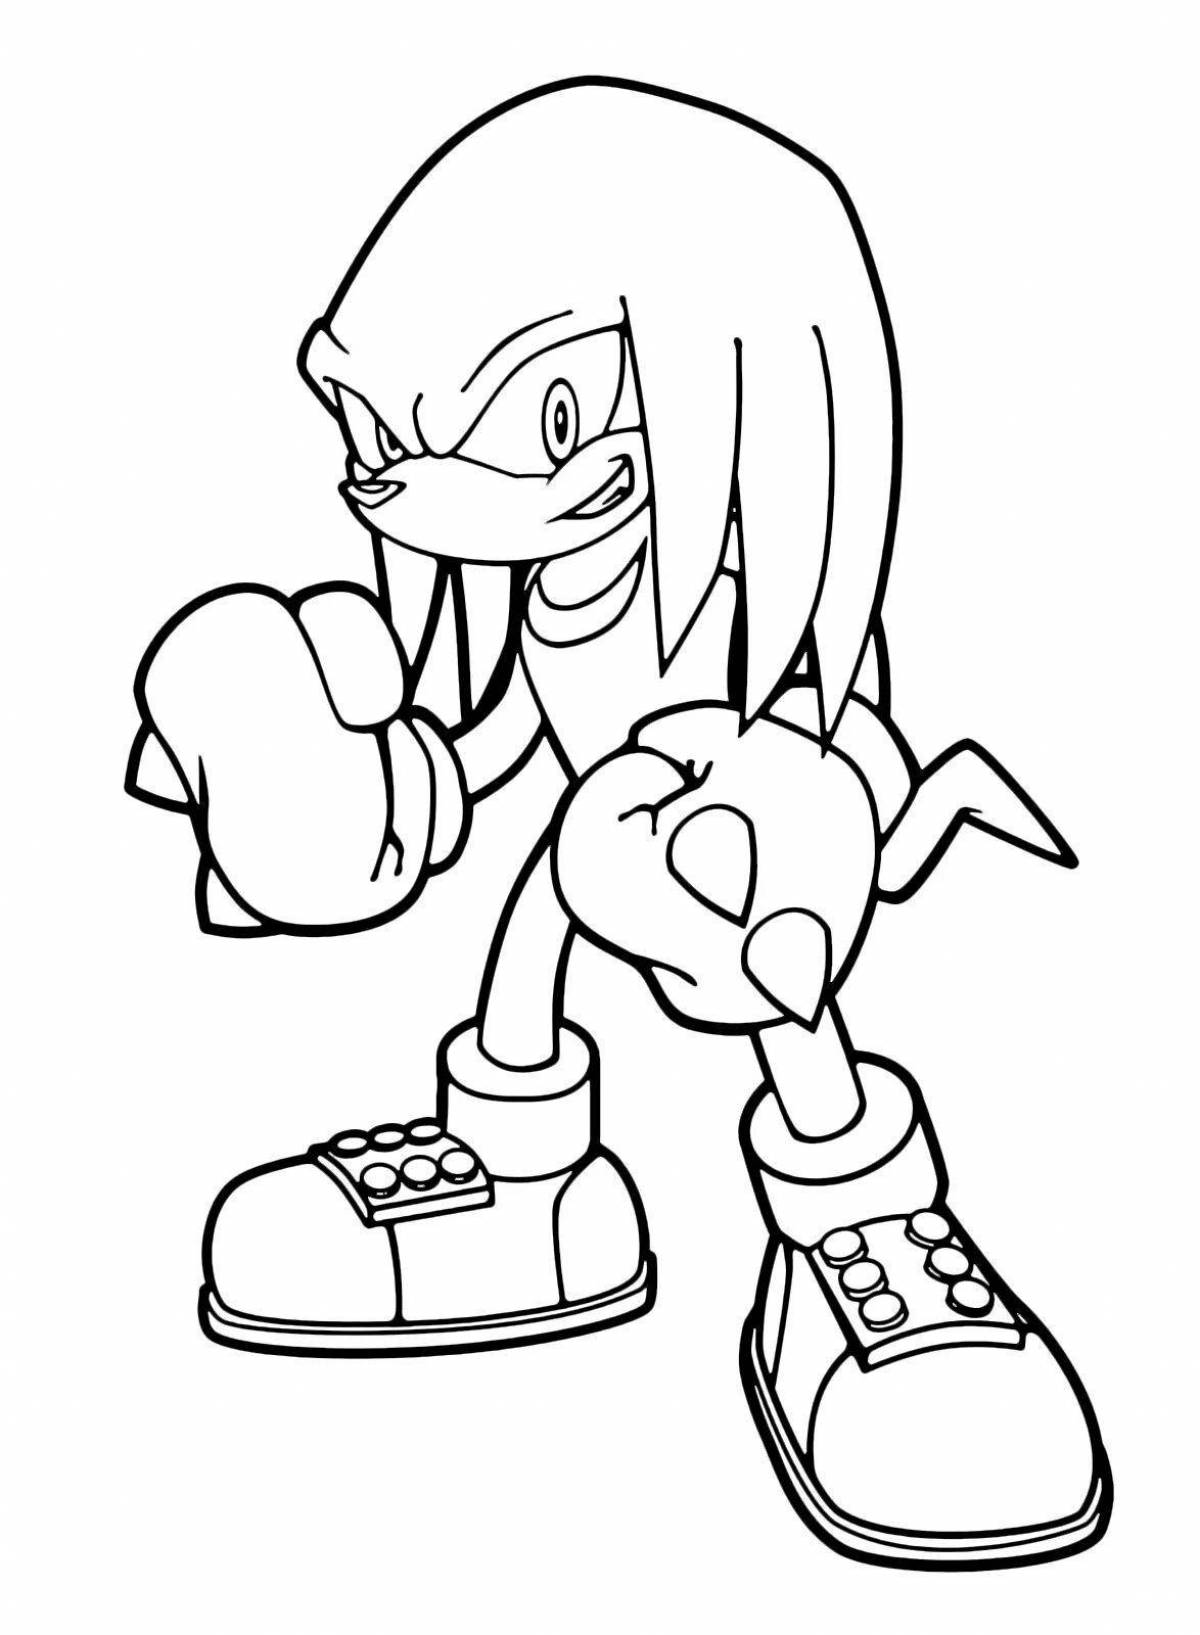 Sonic knuckles #5